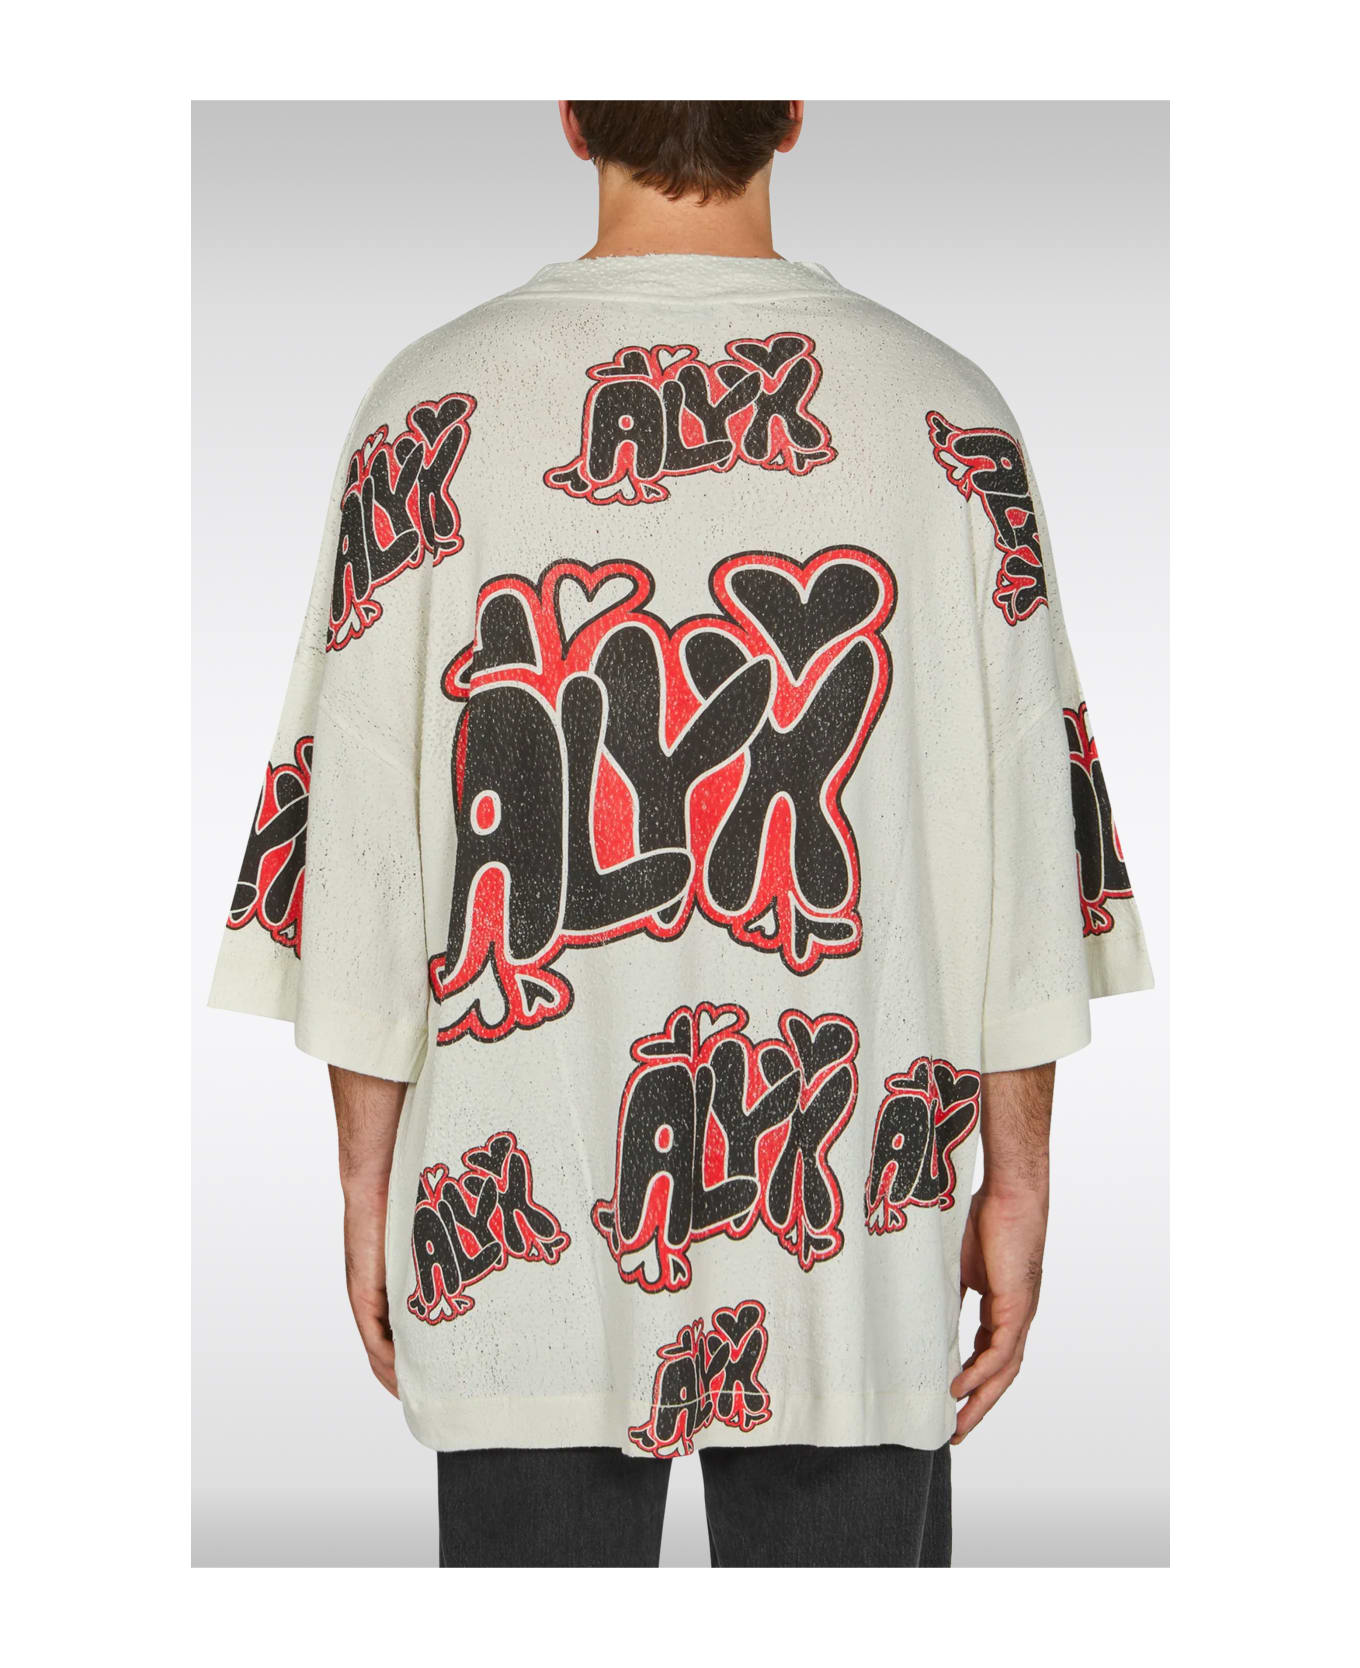 1017 ALYX 9SM Oversize Needle Punch Graphic Tee Off White Distressed Jersey T-shirt With Logo Pattern - Oversize Needle Punch Graphic Tee - Panna